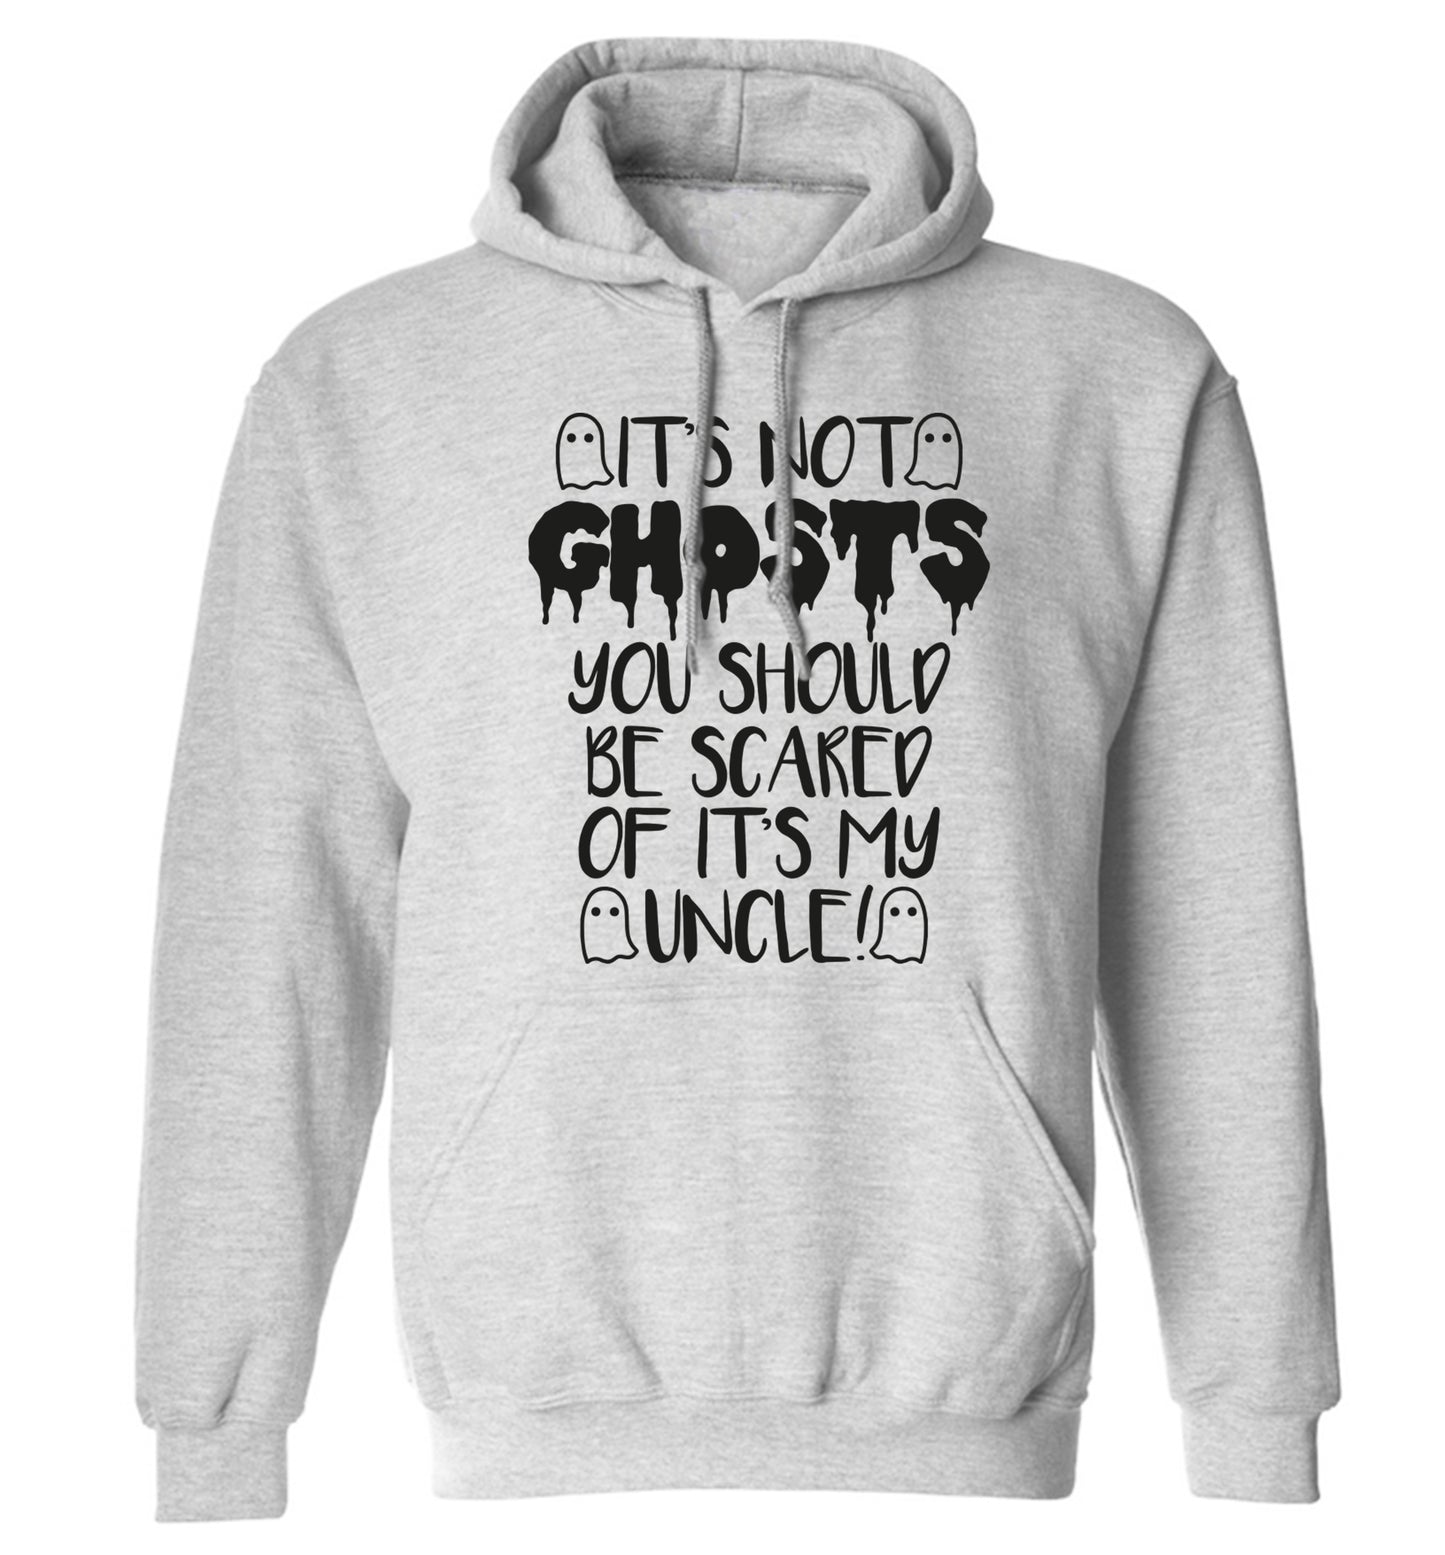 It's not ghosts you should be scared of it's my uncle! adults unisex grey hoodie 2XL